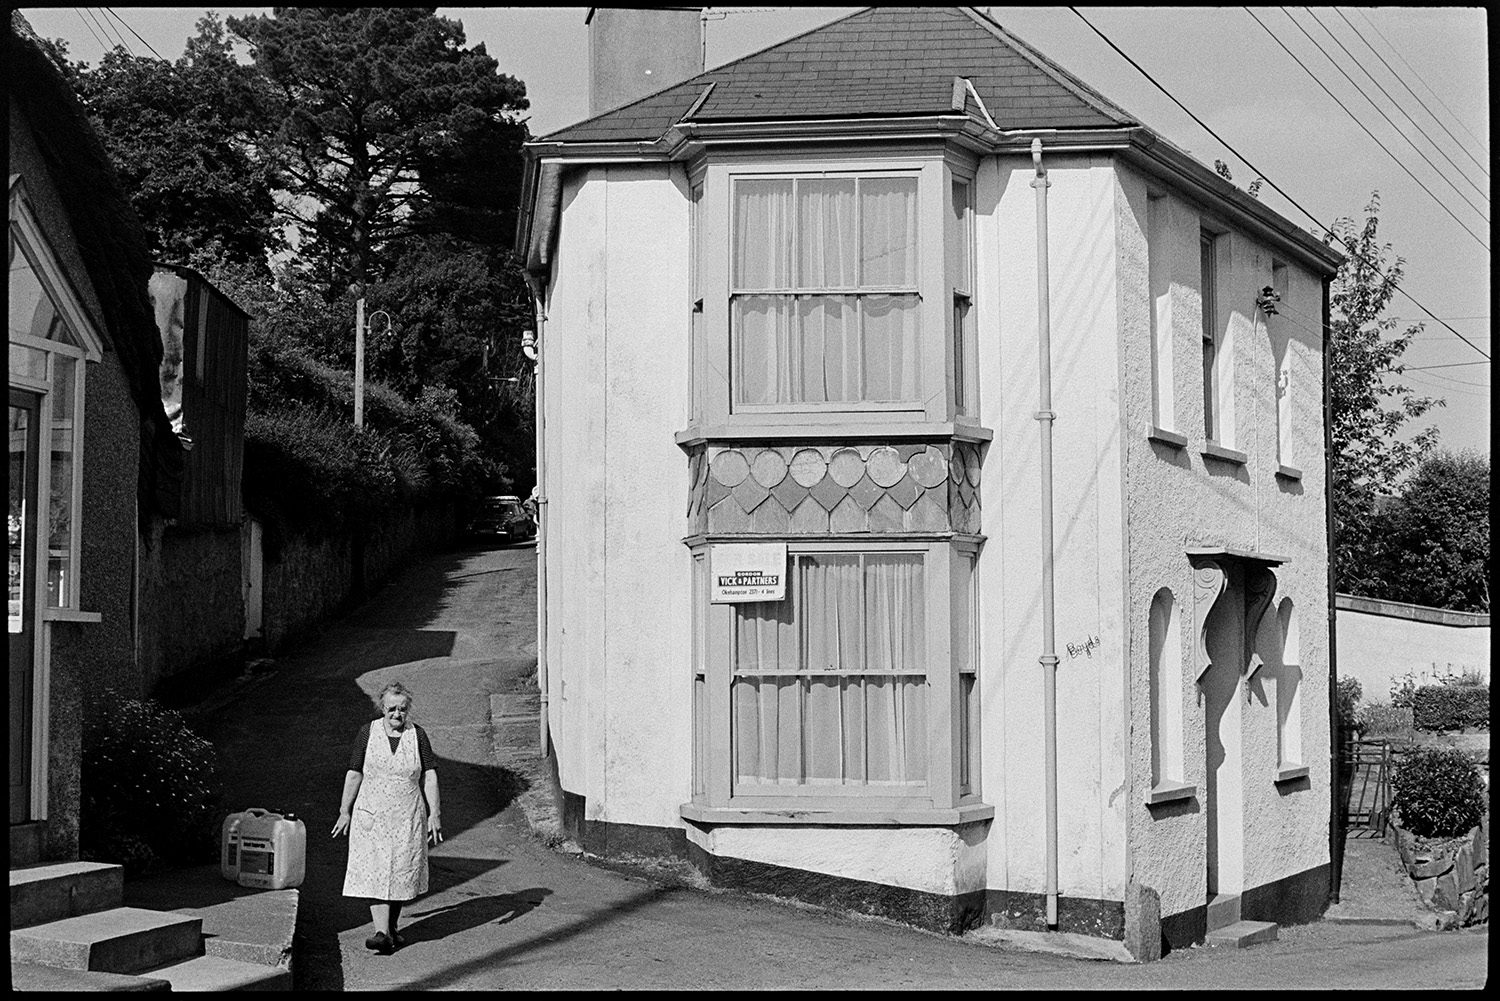 Cottage with decorative slate work. 
[A cottage on the corner of Park Road, Hatherleigh. There is decorative slate work between the bay windows. A woman is walking past the cottage and two containers can be seen further up the road.]